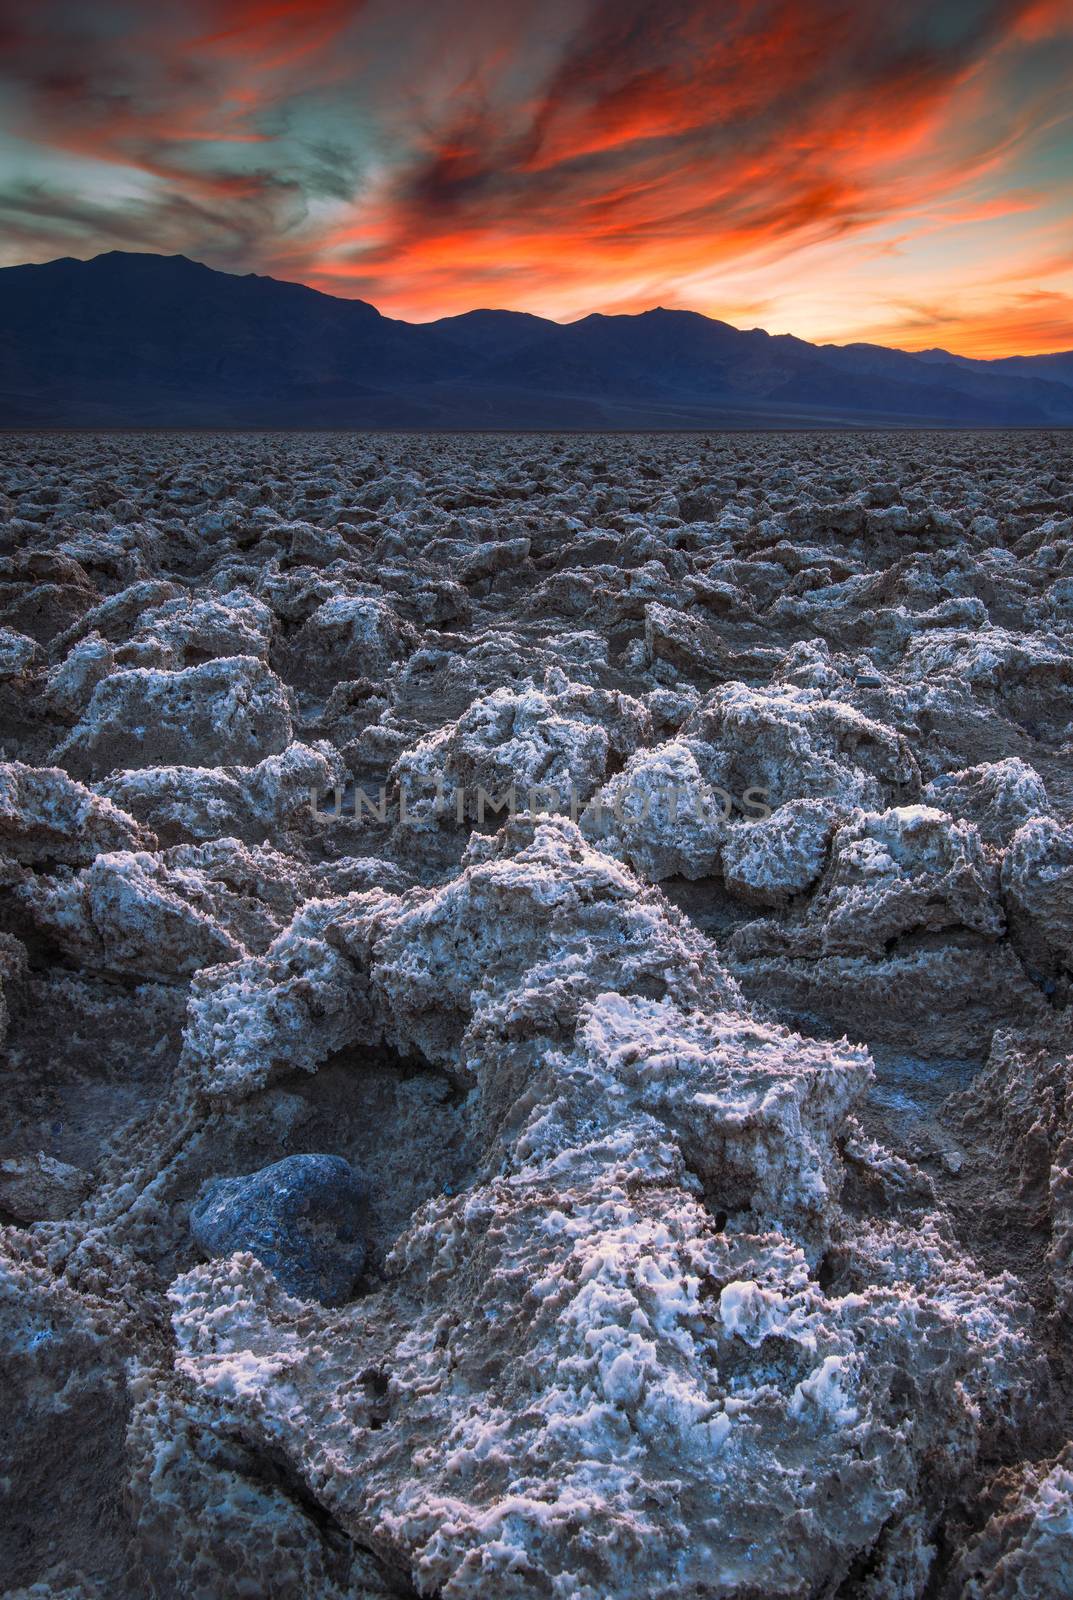 Death valley is one of the hottest regions on Earth with temperatures soaring past 135 degrees fahrenheit.